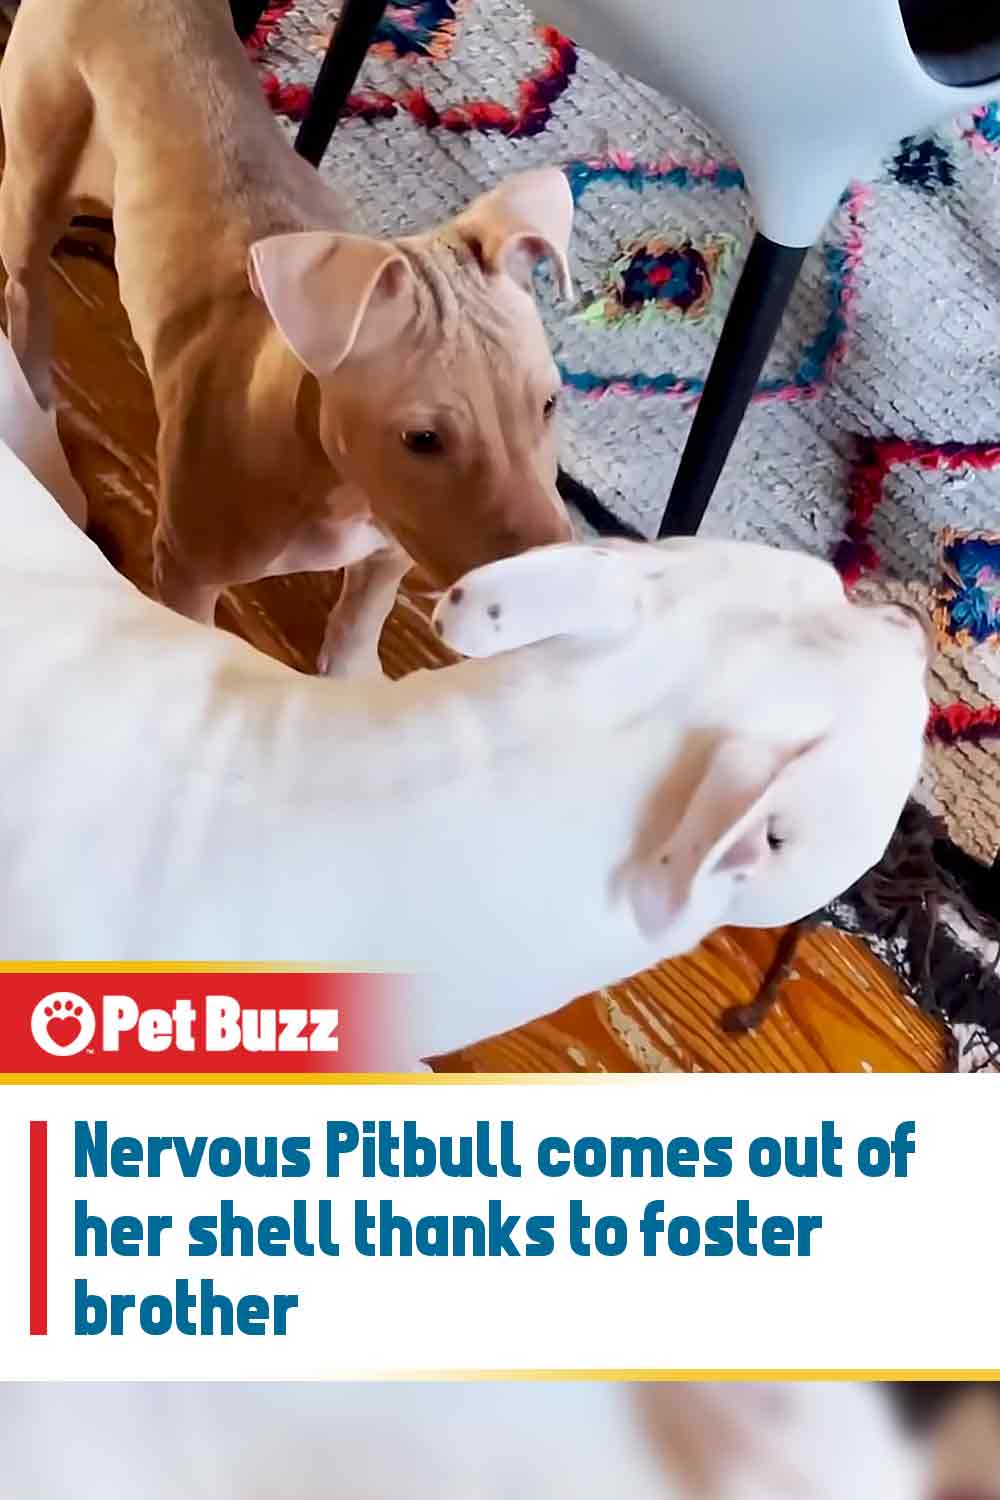 Nervous Pitbull comes out of her shell thanks to foster brother